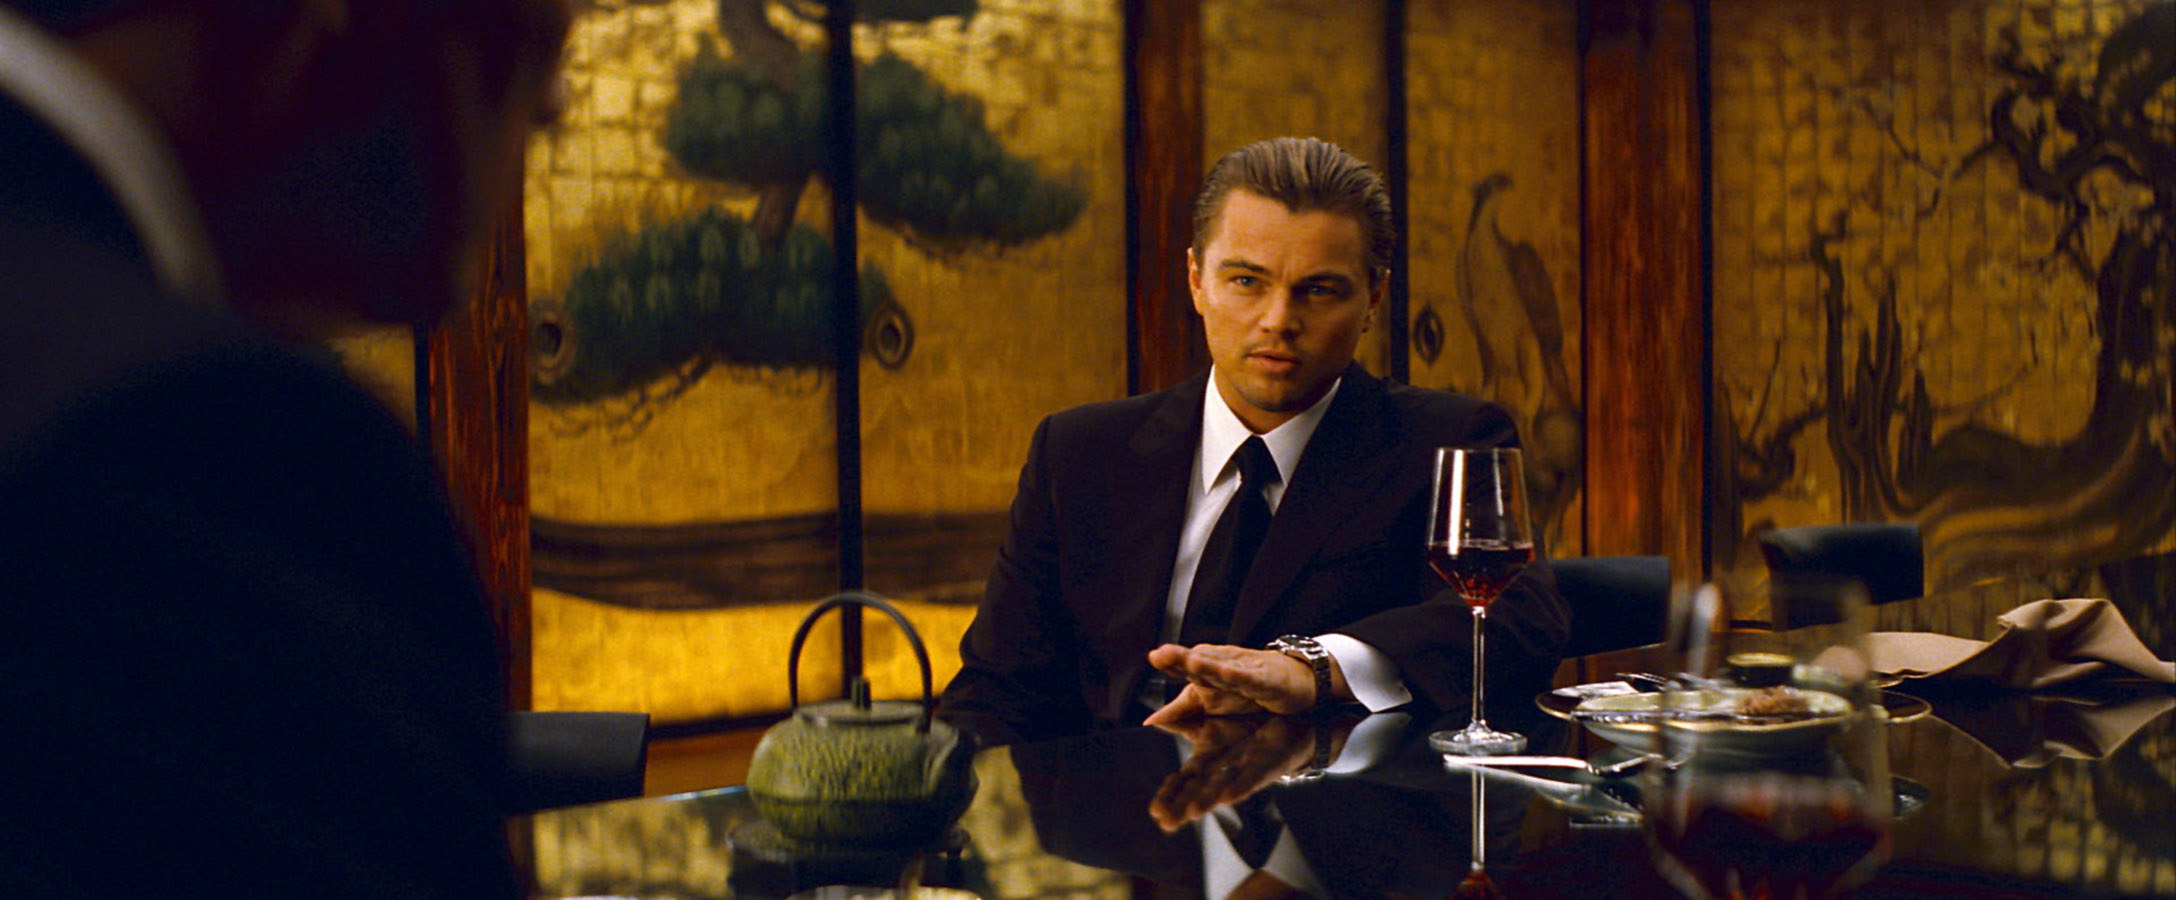 Leo in Inception